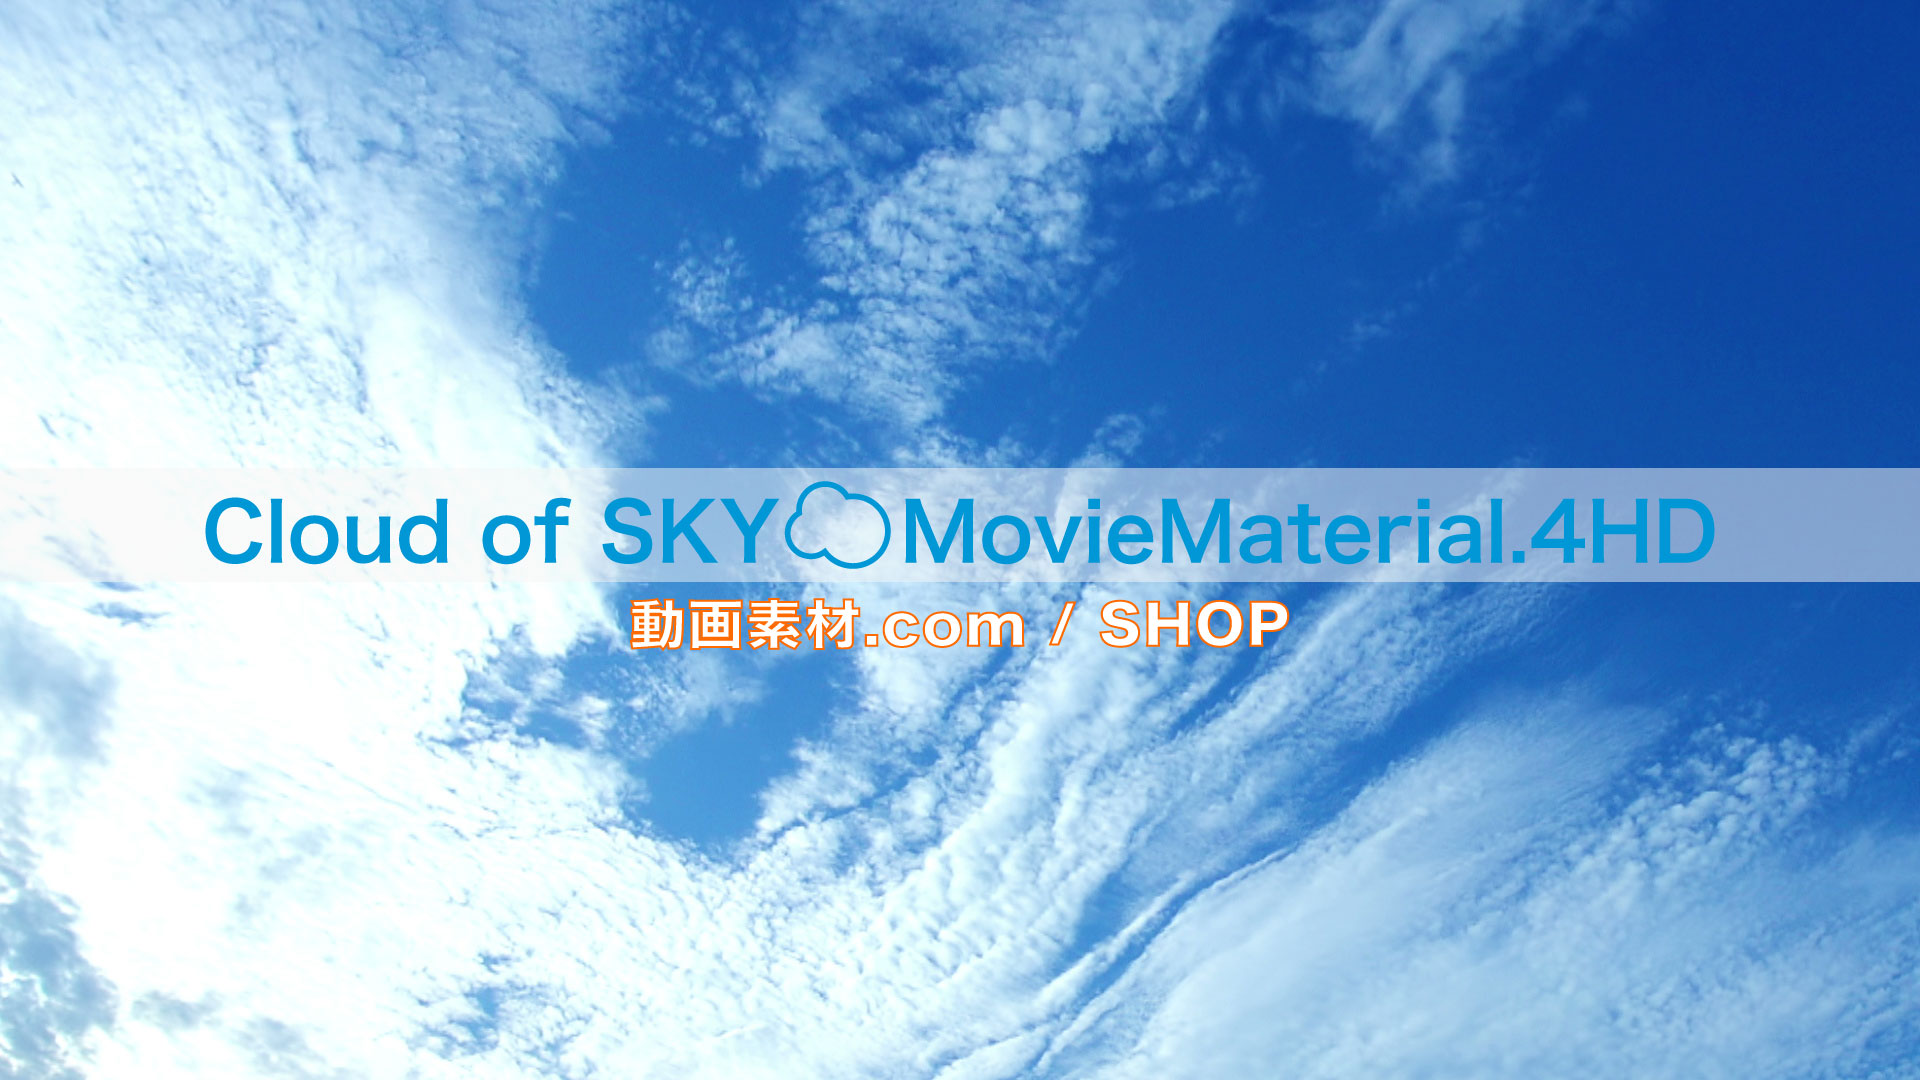 【Cloud of SKY MovieMaterial.HDSET】 ロイヤリティフリー フルハイビジョン動画素材集 Image.18